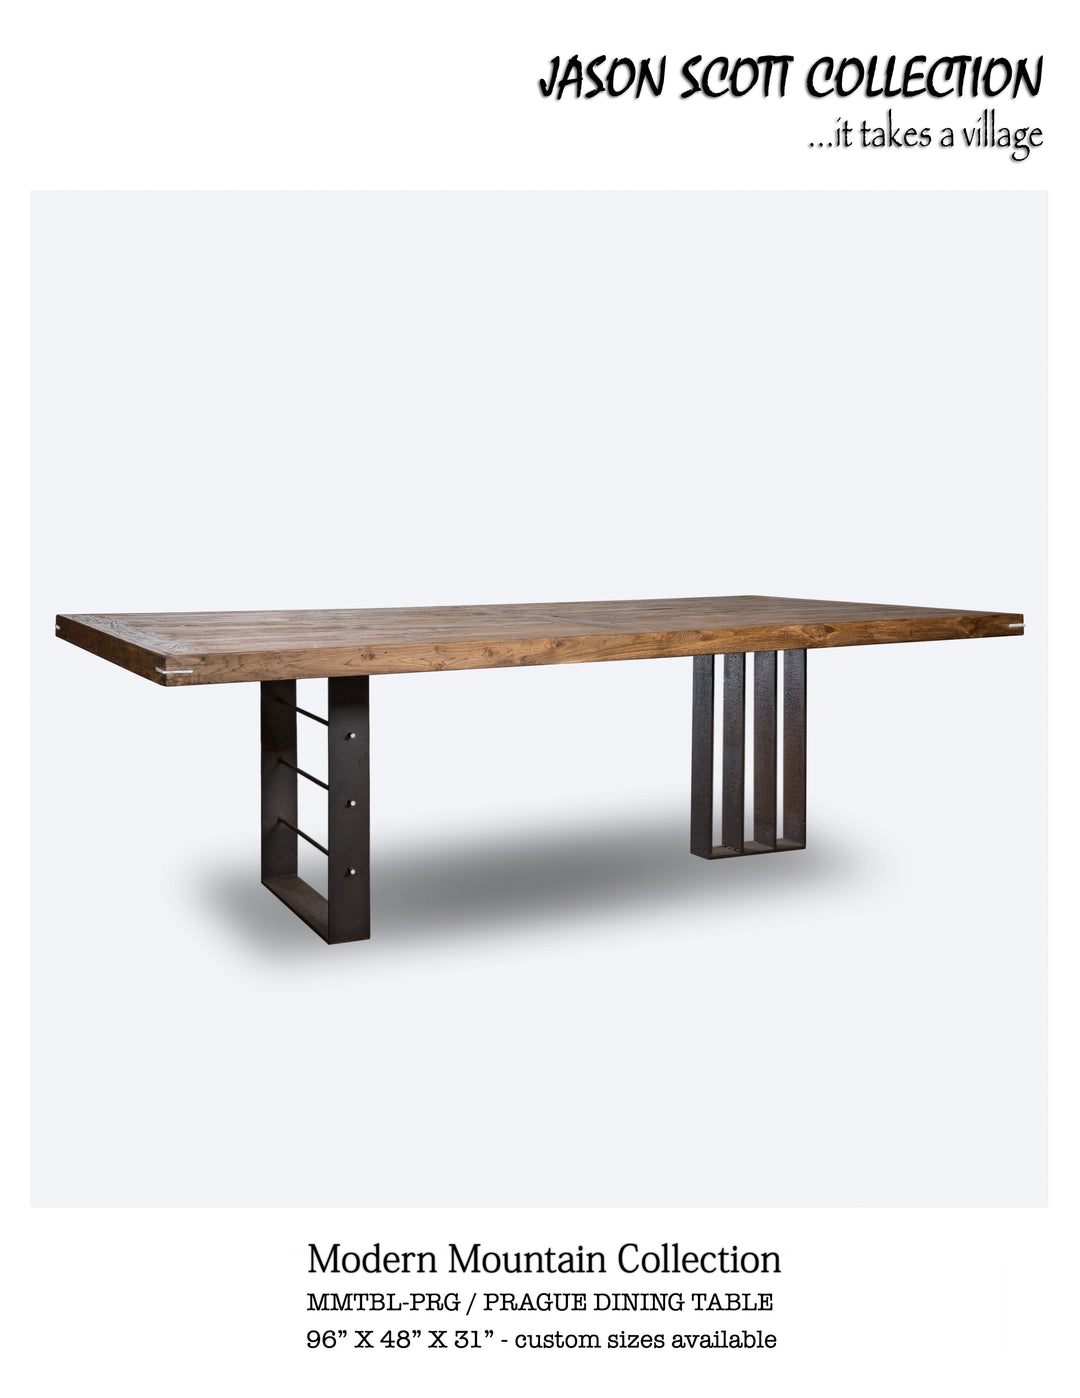 Prague Dining Table (Modern Mountain Collection)